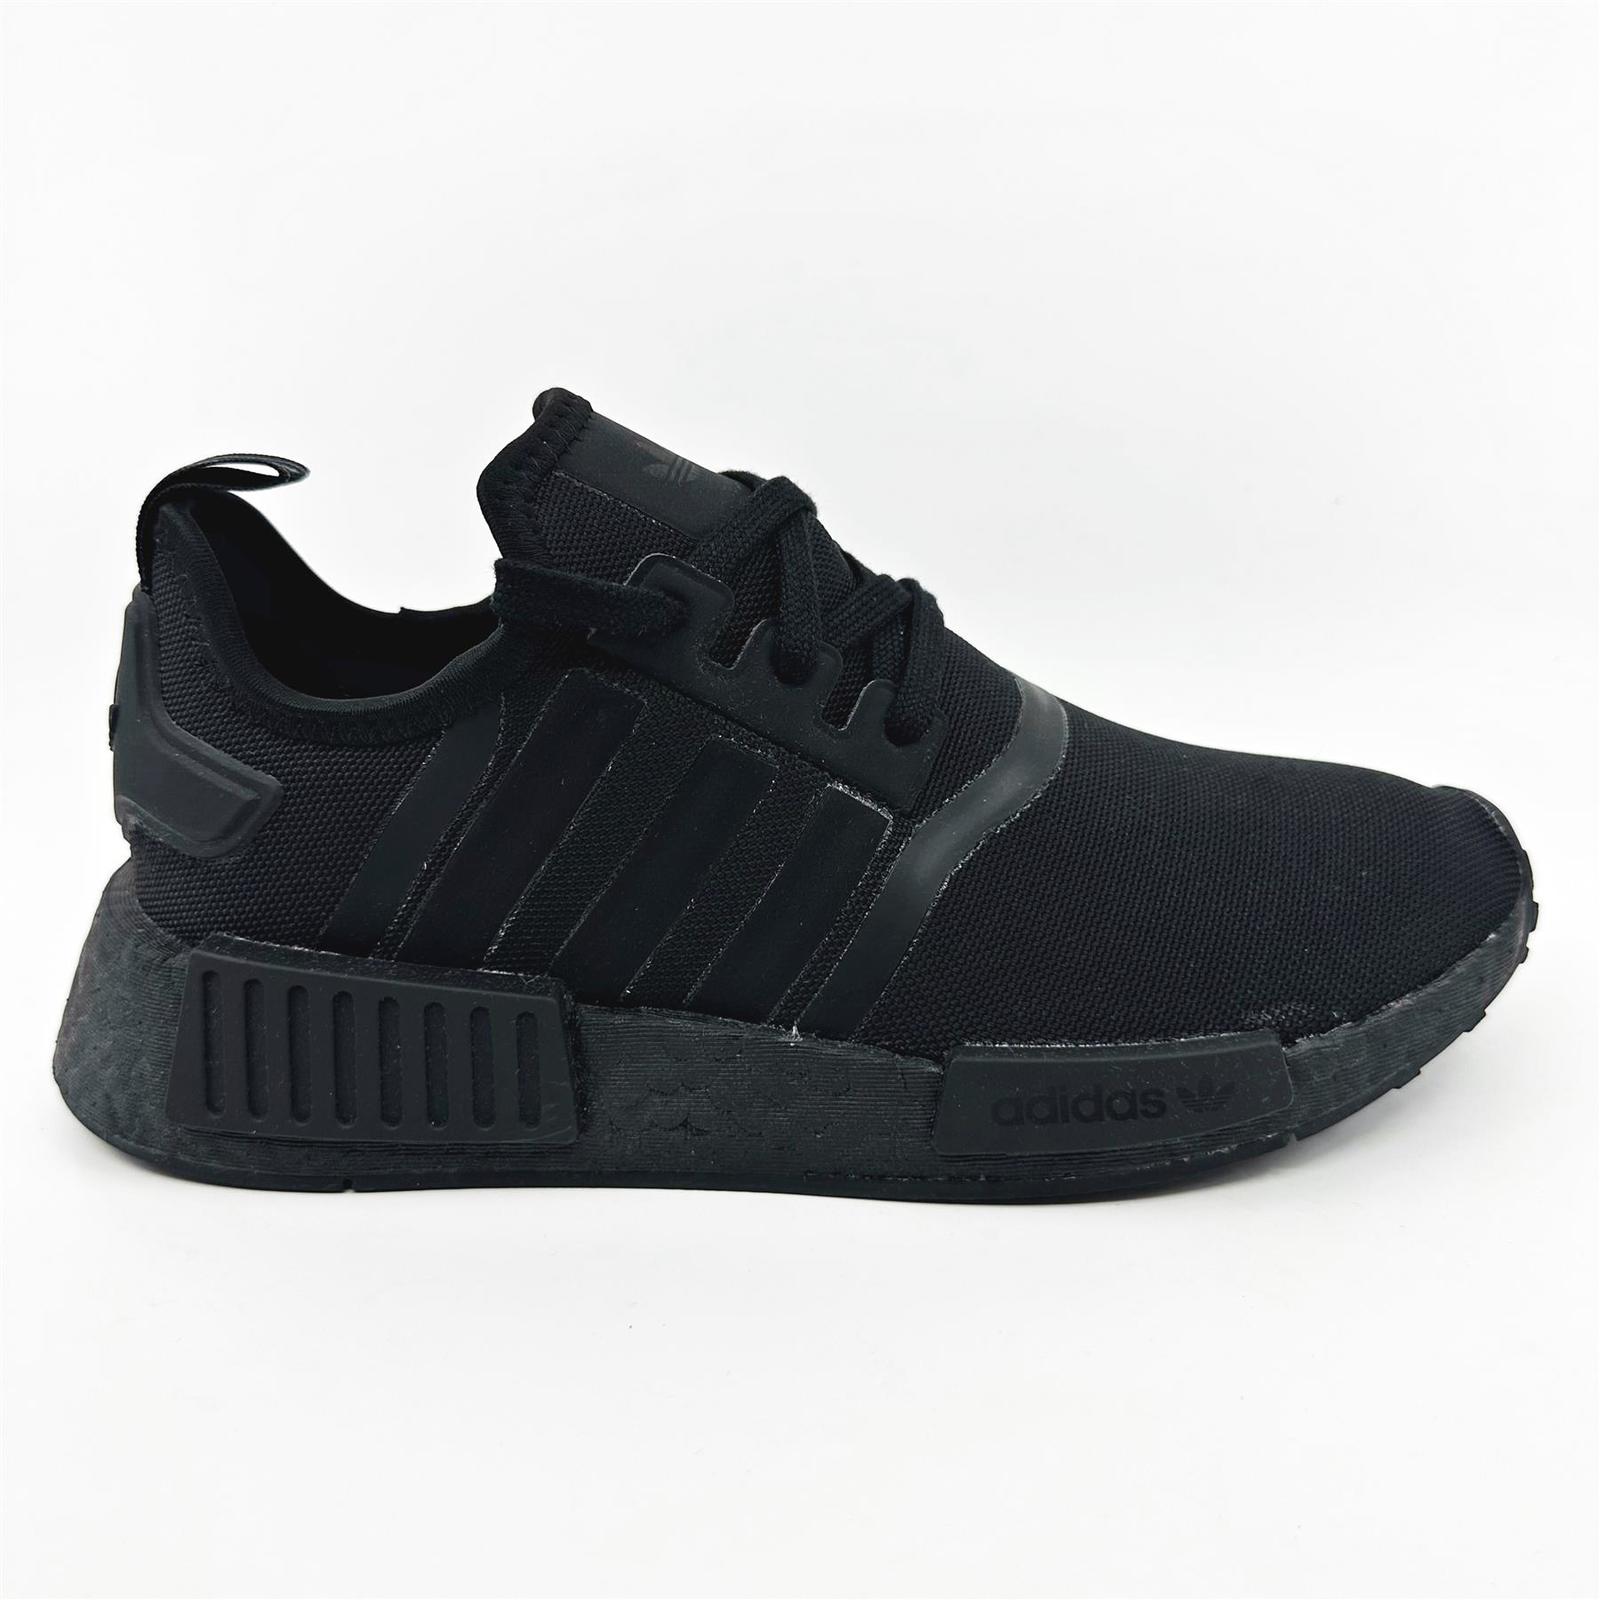 Primary image for adidas NMD R1 Triple Black Unisex Kids Athletic Sneaker H03994